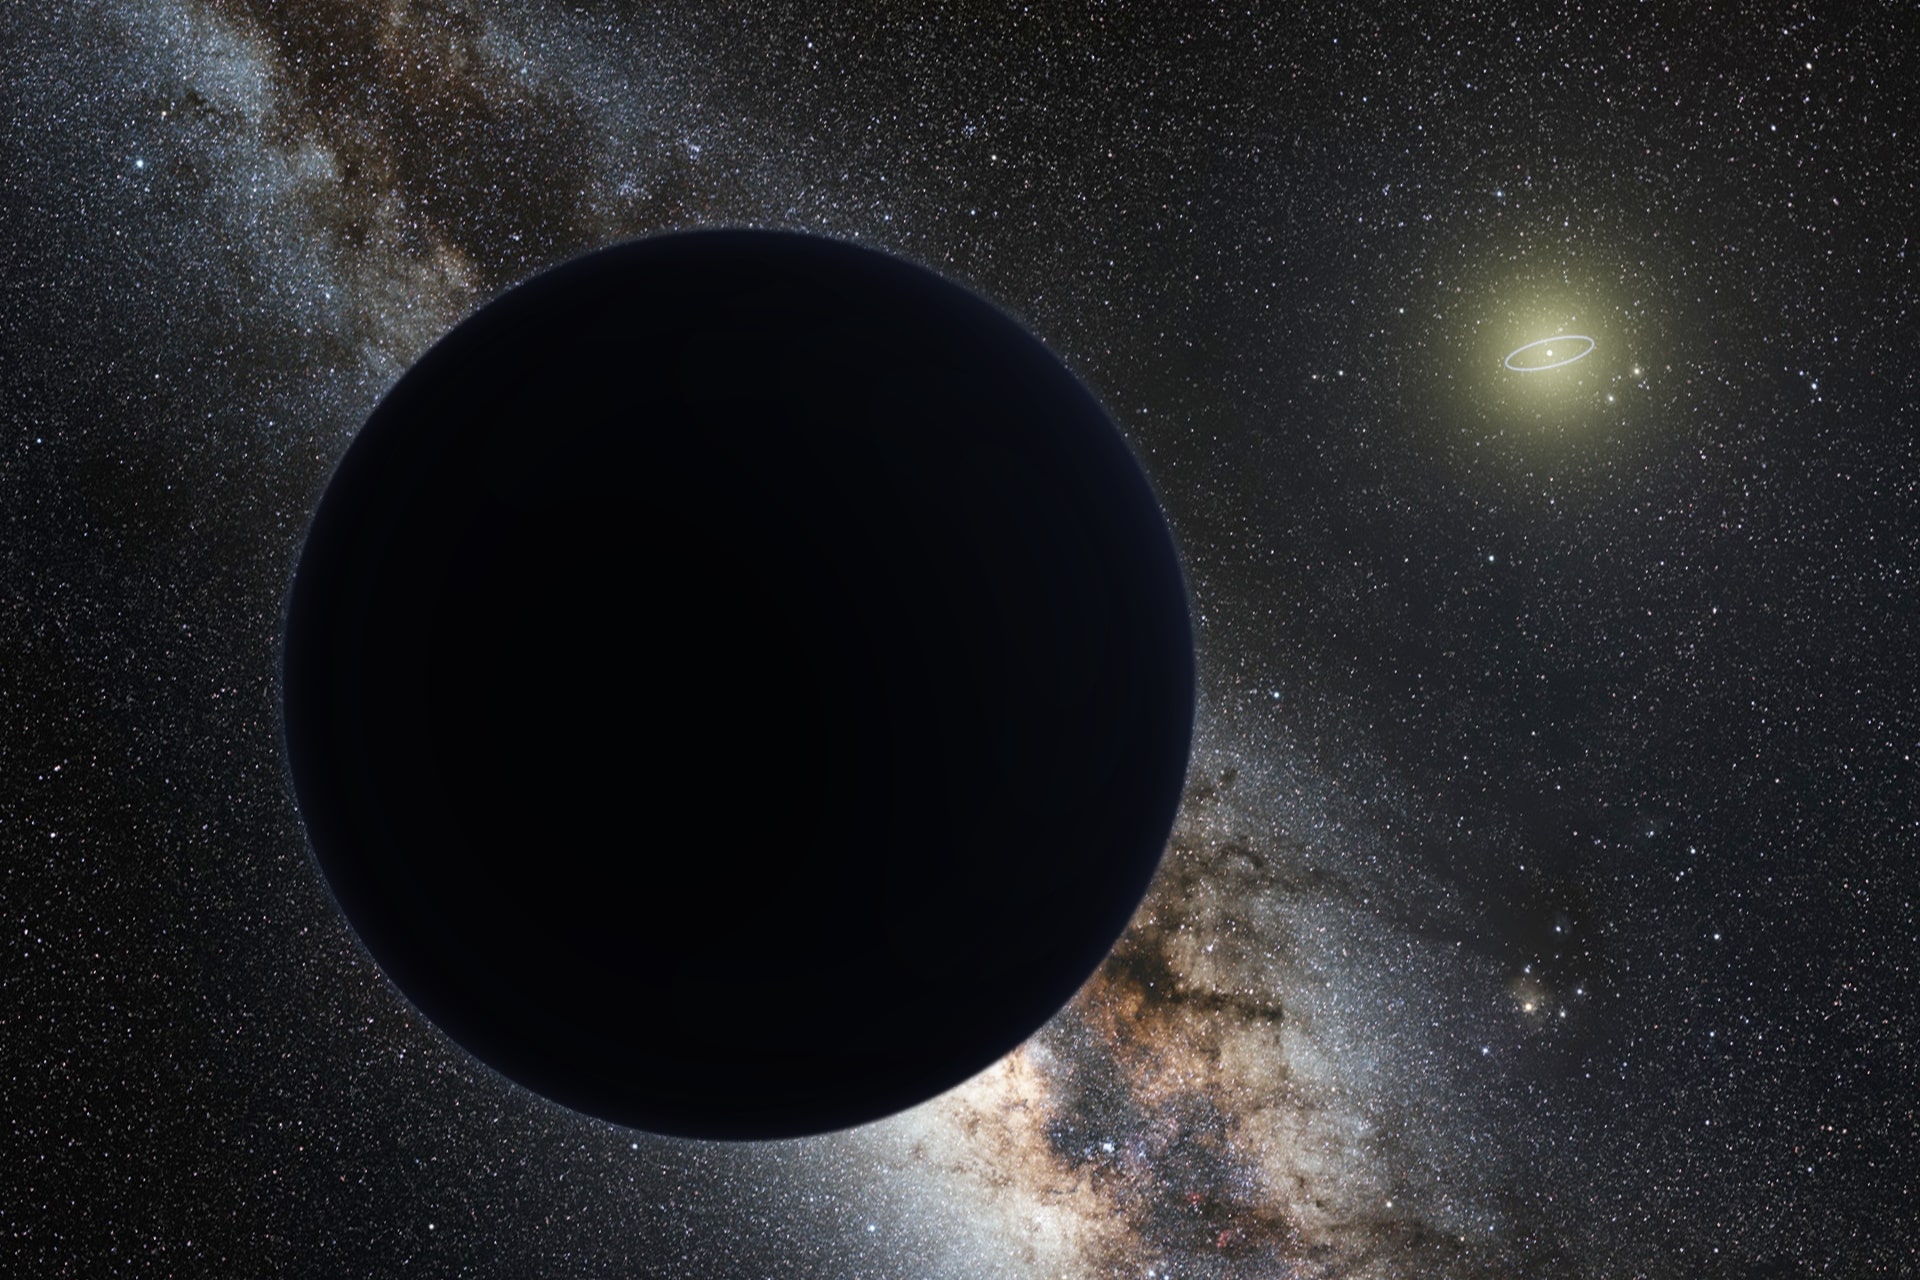 Planet 9 is elusive.  Is it real or an illusion?